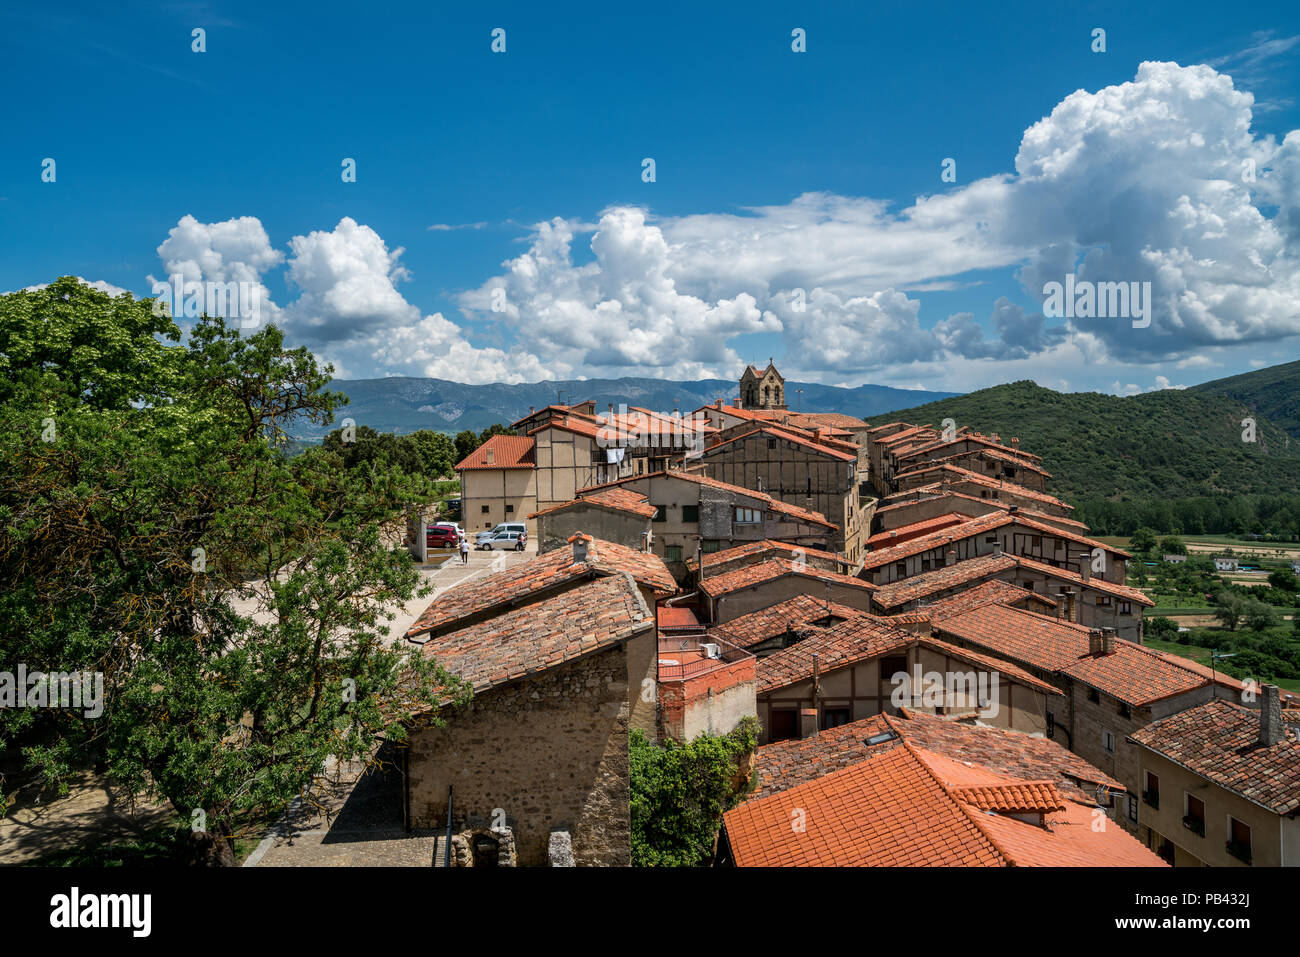 Panoramic view of a small town Frías, province of Burgos, Castile and Leon, Spain Stock Photo